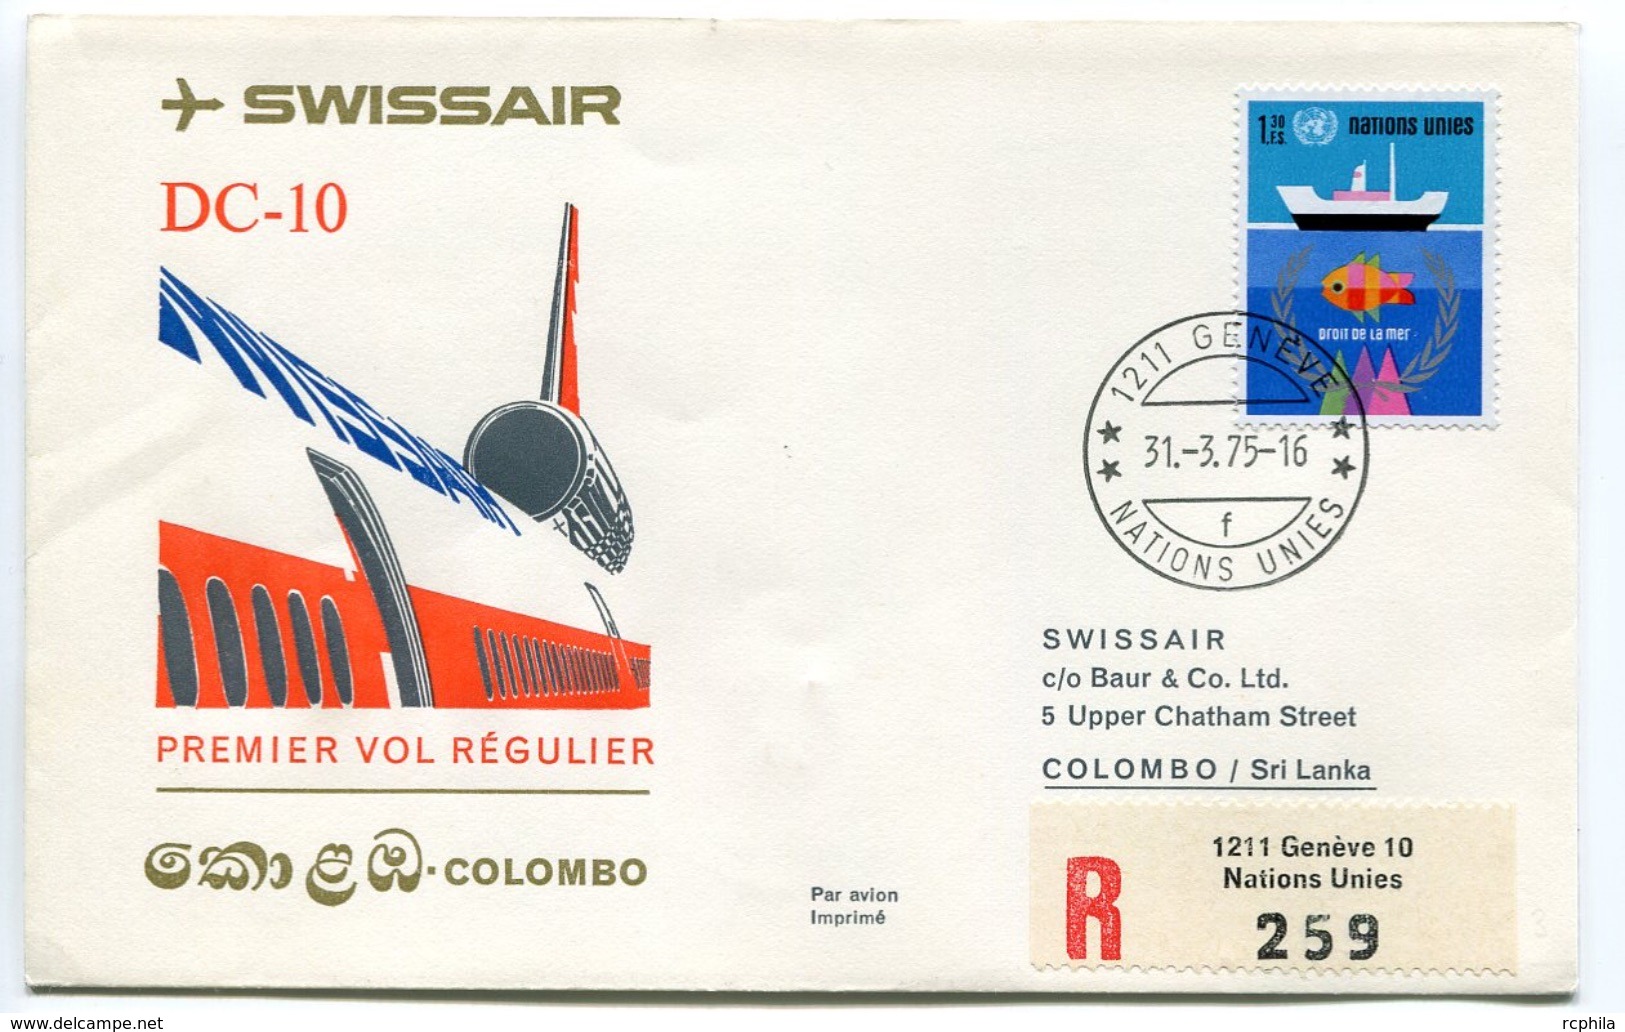 RC 6623 SUISSE 1975 1er VOL SWISSAIR GENEVE - COLOMBO SRI LANKA FFC LETTRE COVER - First Flight Covers